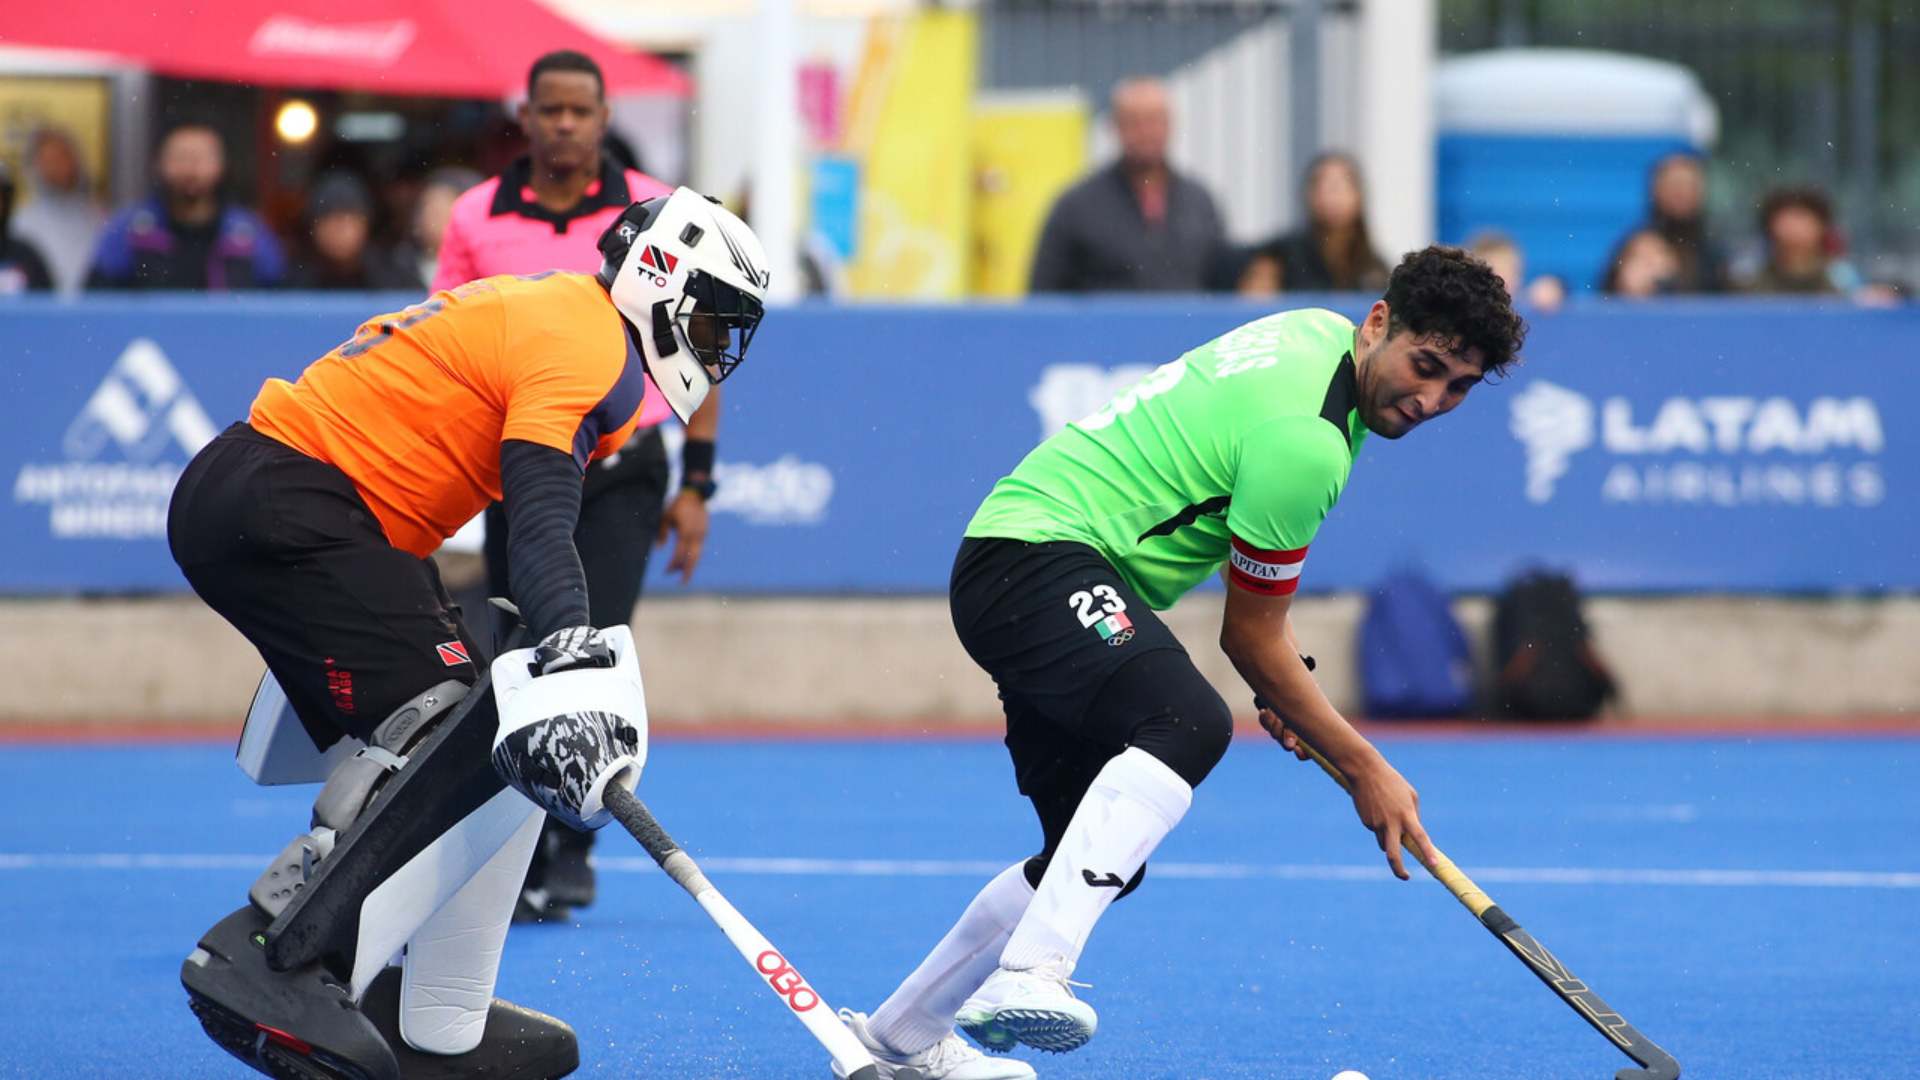 Male field hockey: Mexico wins on penalties against Trinidad and Tobago